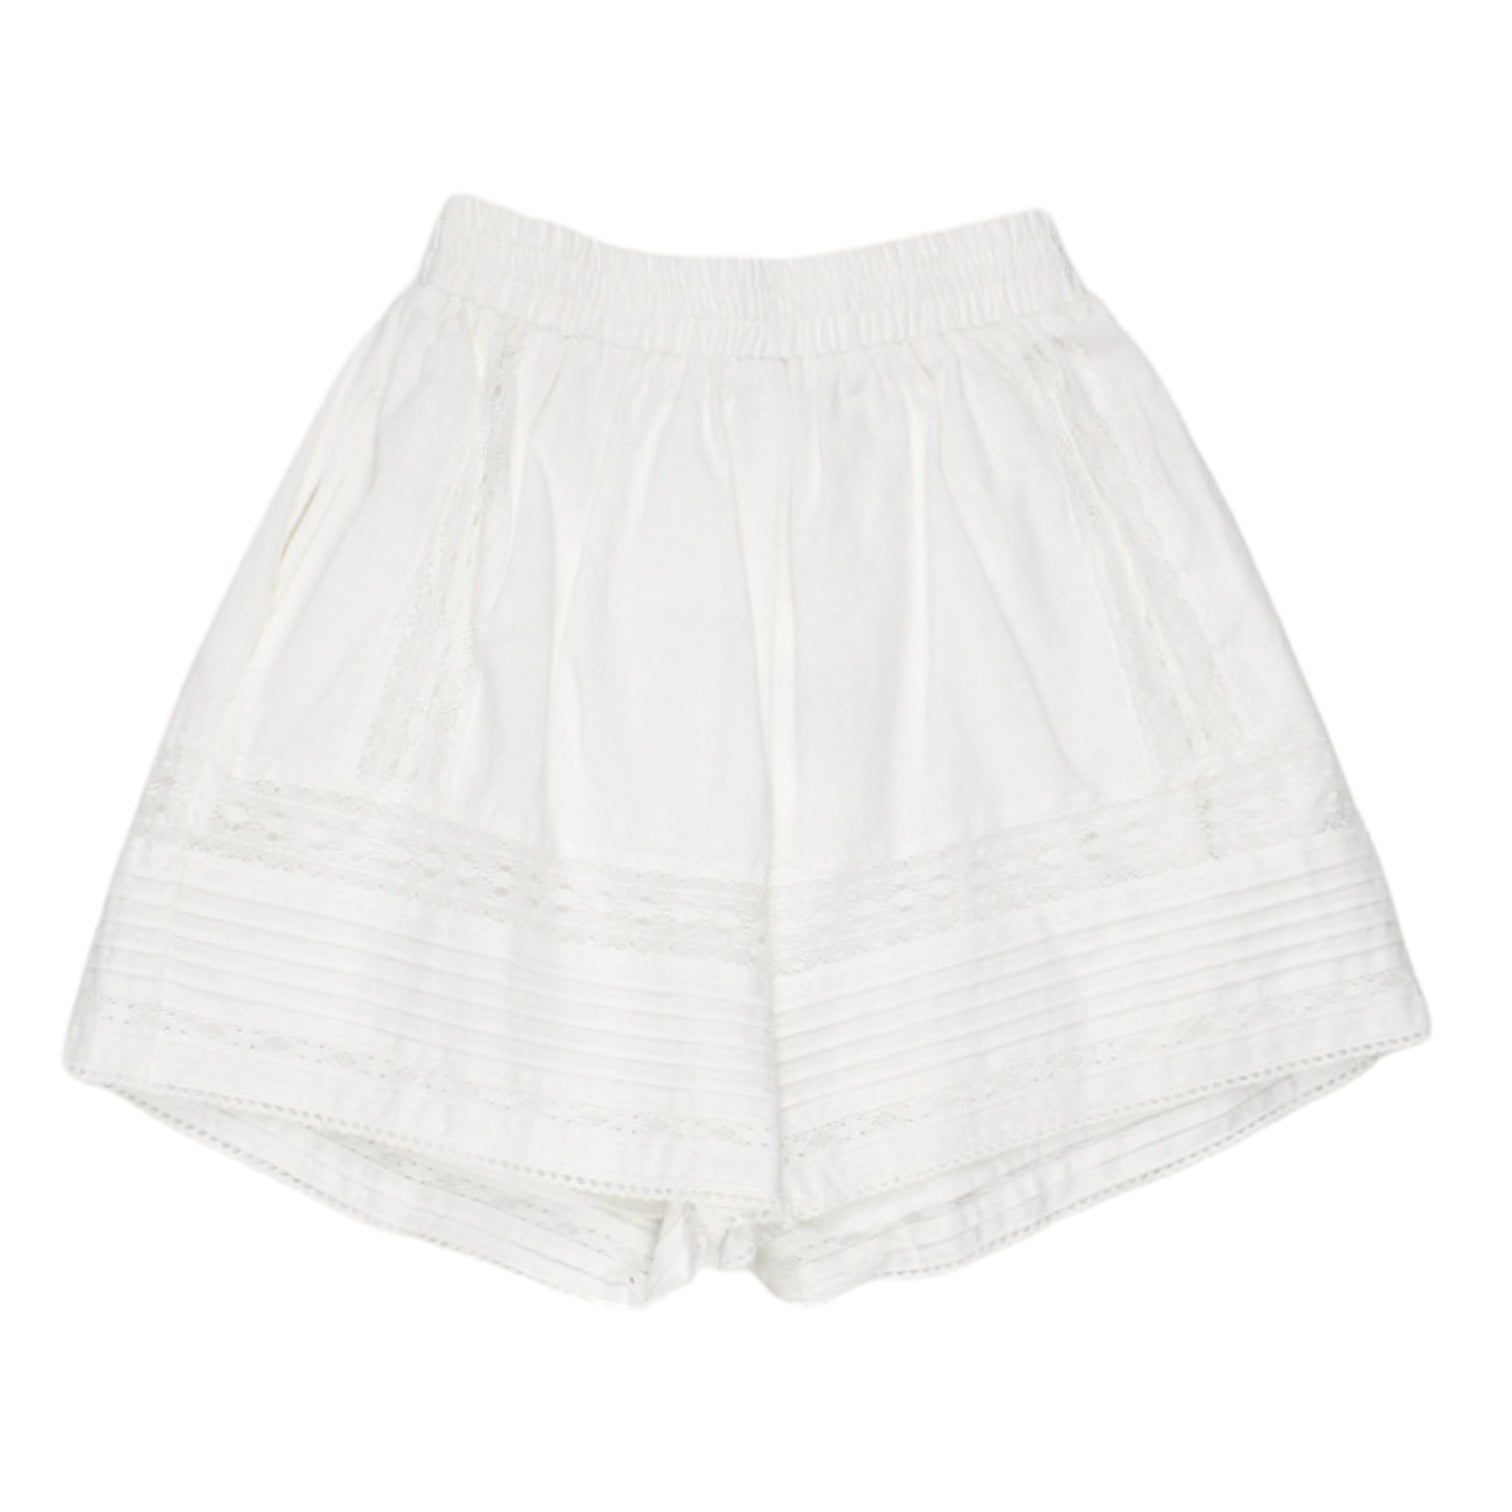 Meadows White Lined Caspia Shorts